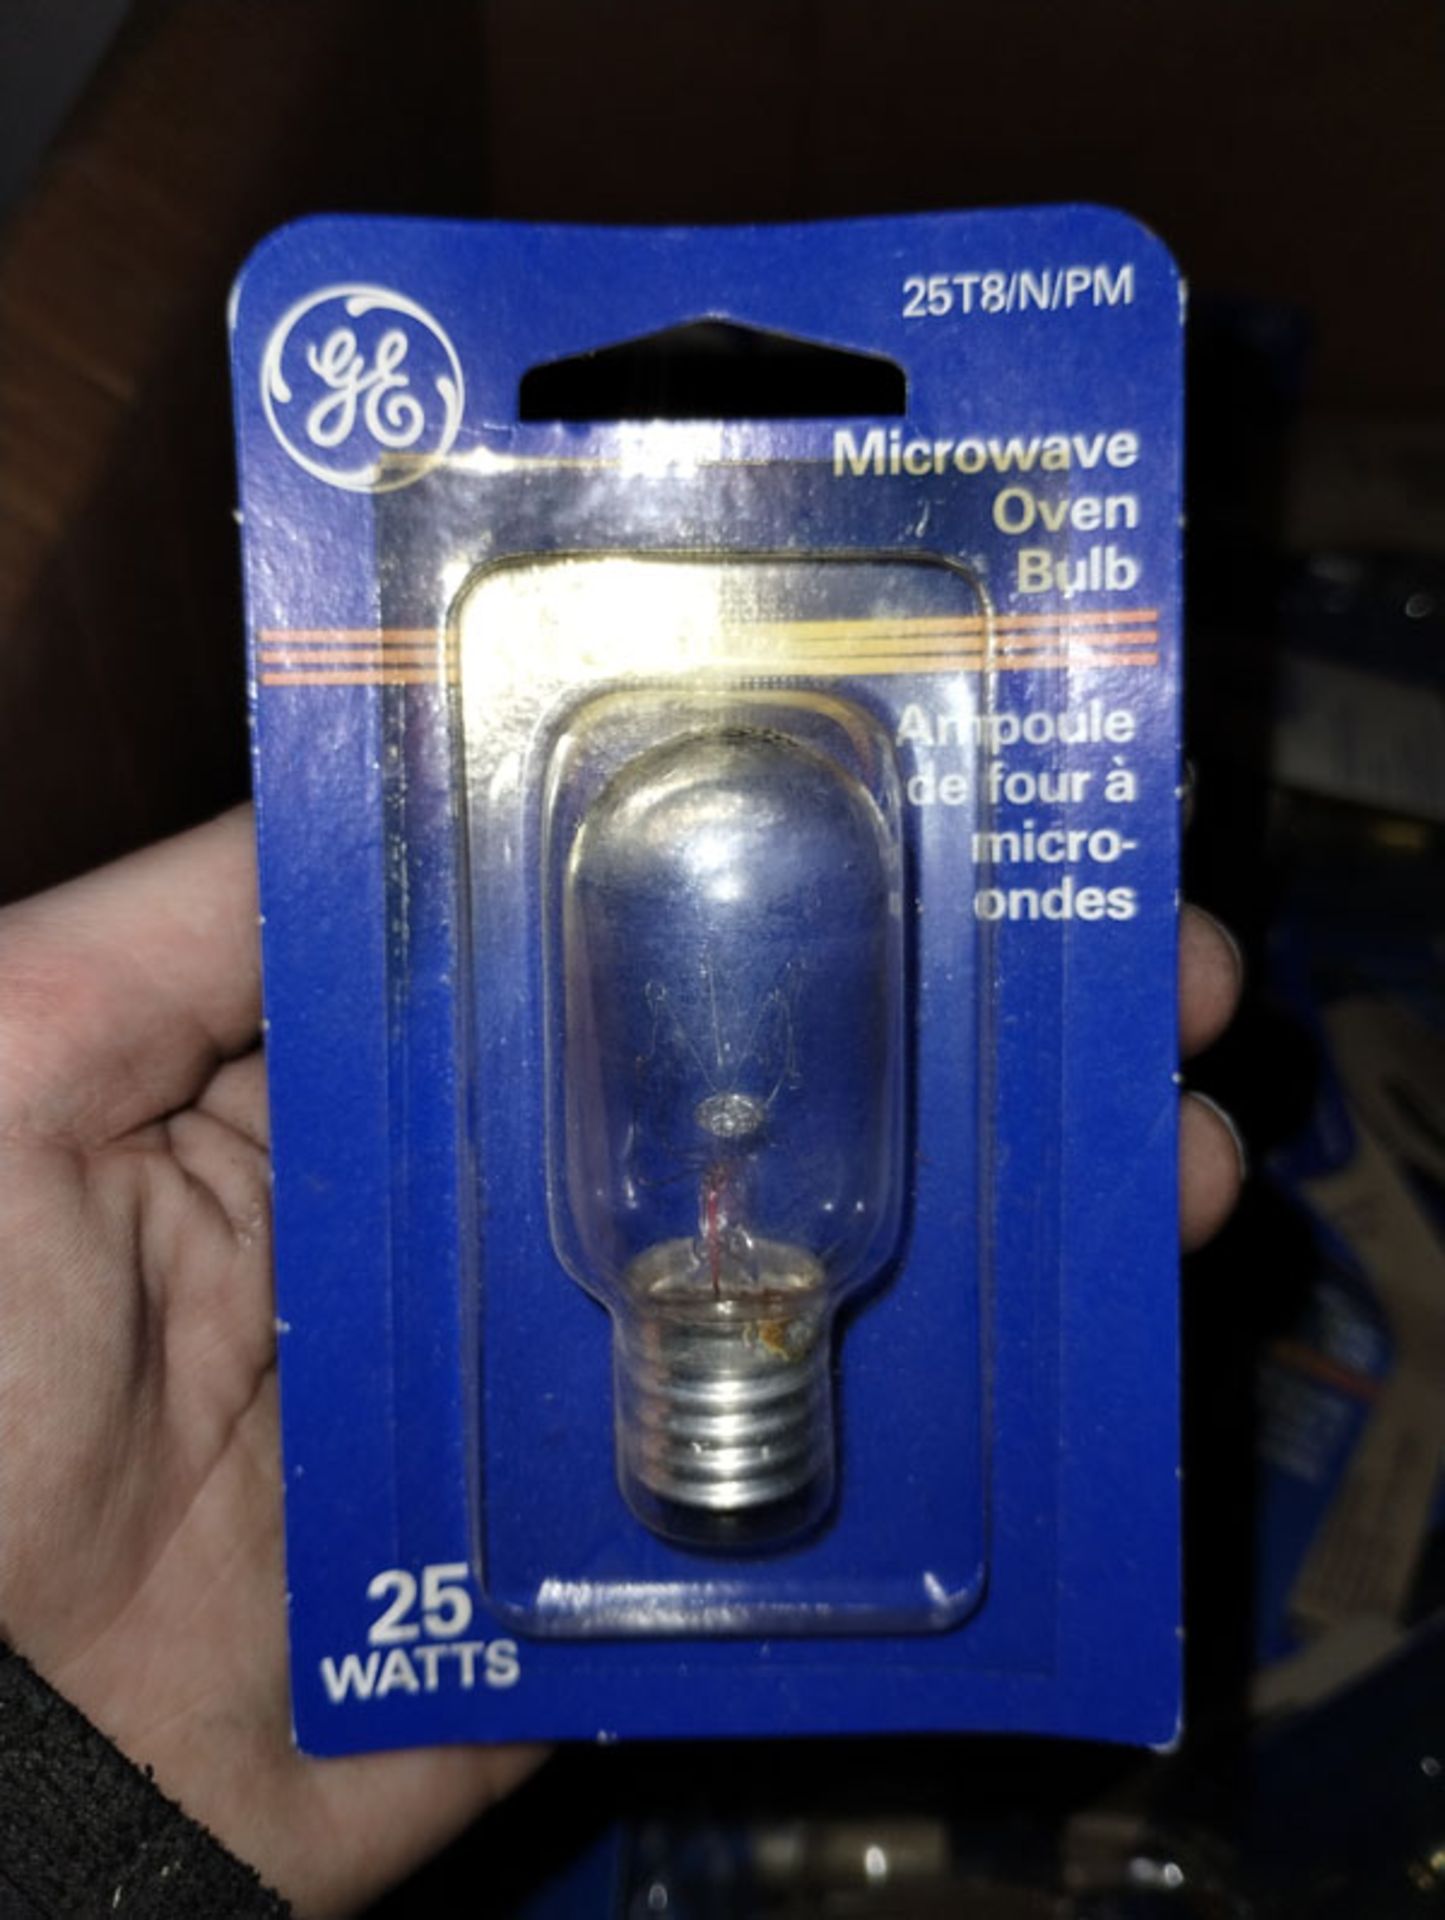 BOX OF GE MICROWAVE OVEN LIGHT BULBS 25T8/N/PM - Image 3 of 4